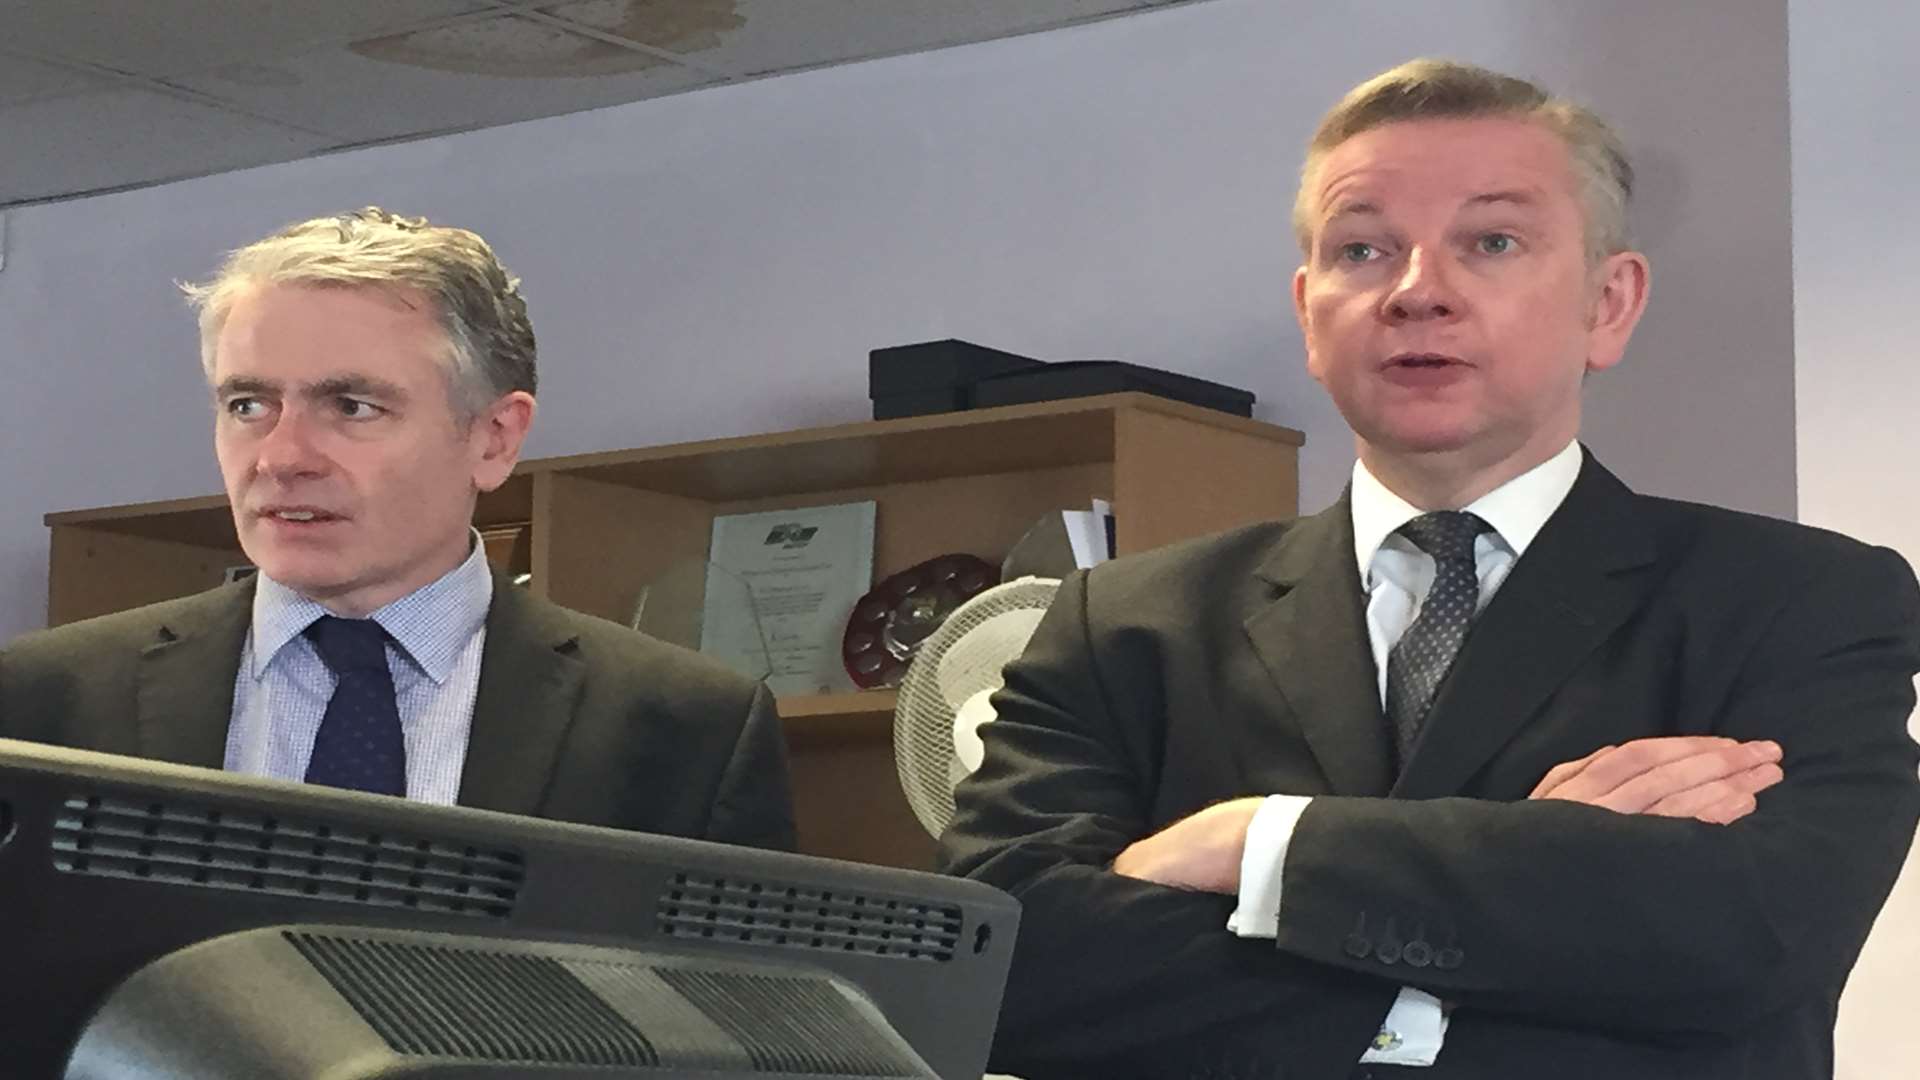 Conservative chief whip Michael Gove is toured around the office by Medway Messenger editor Bob Bounds